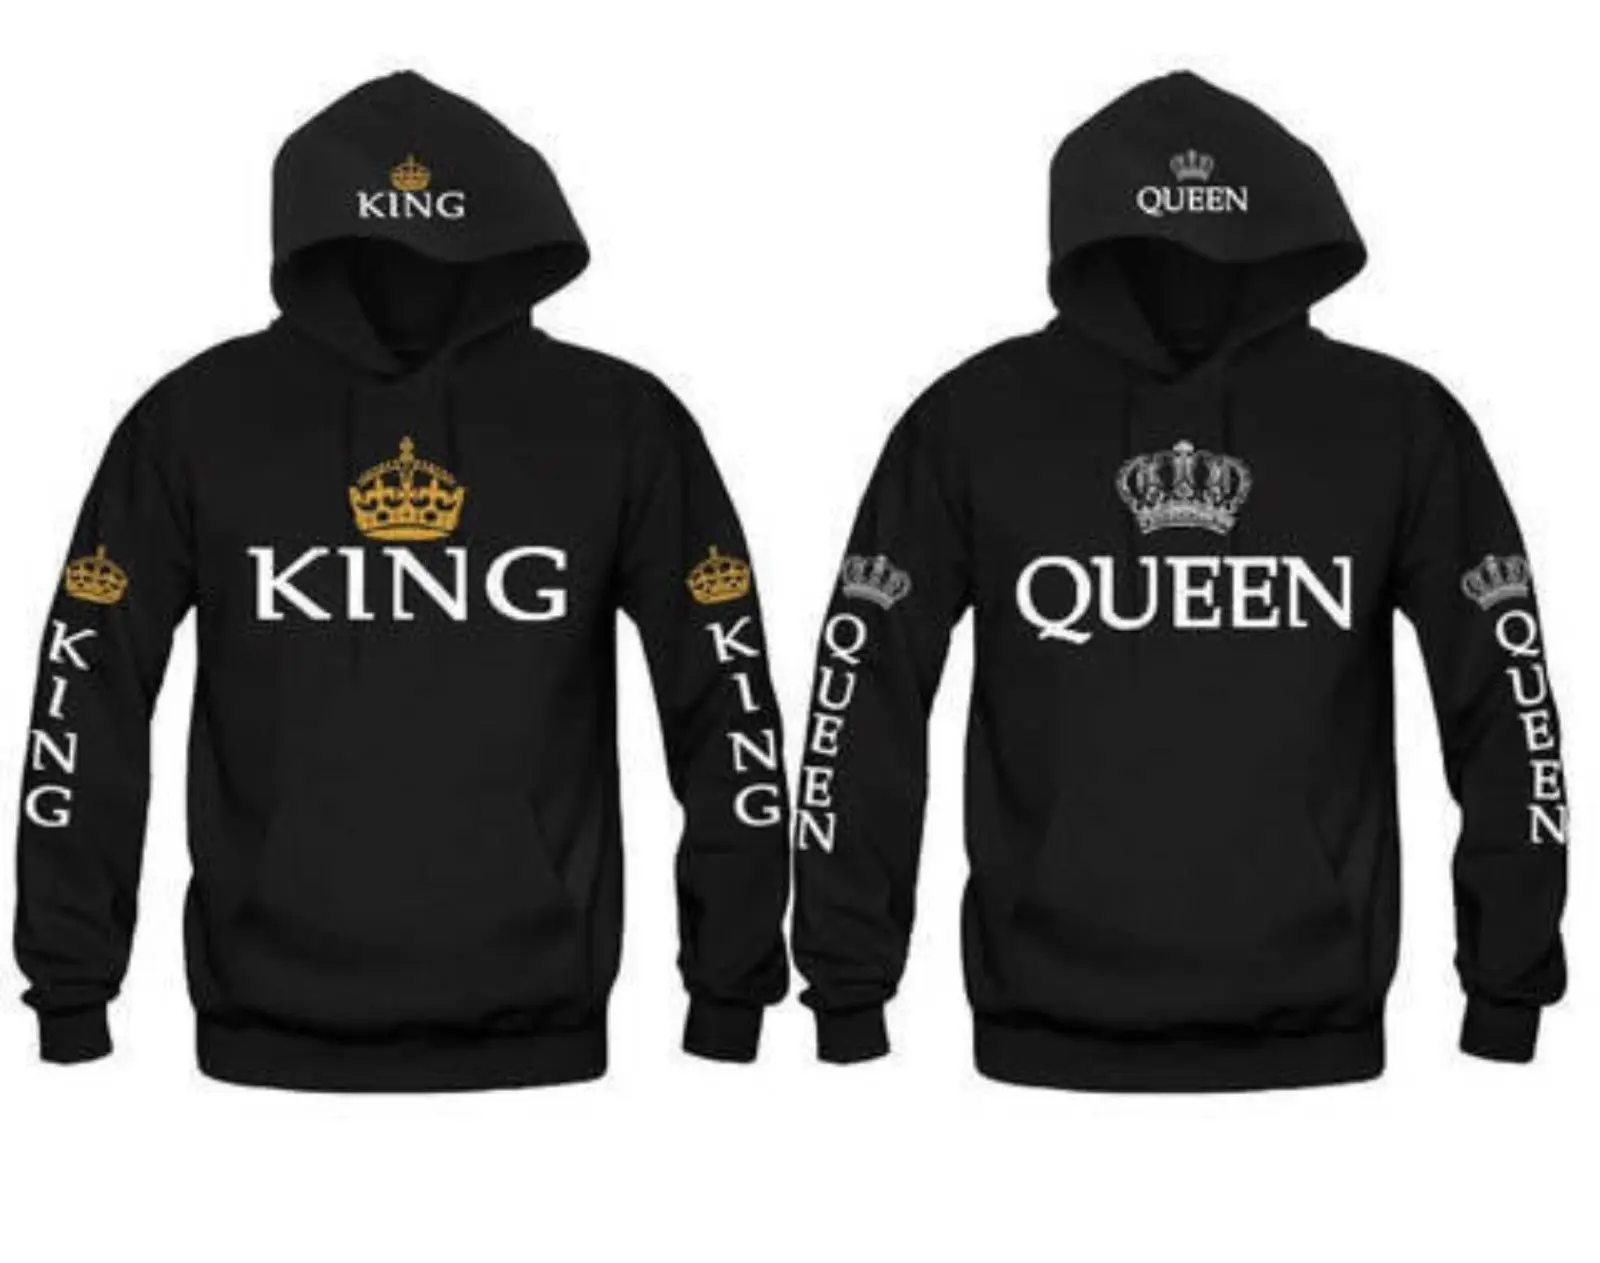 King And Queen Hoodies Valentine New Multi Colors Matching Cute